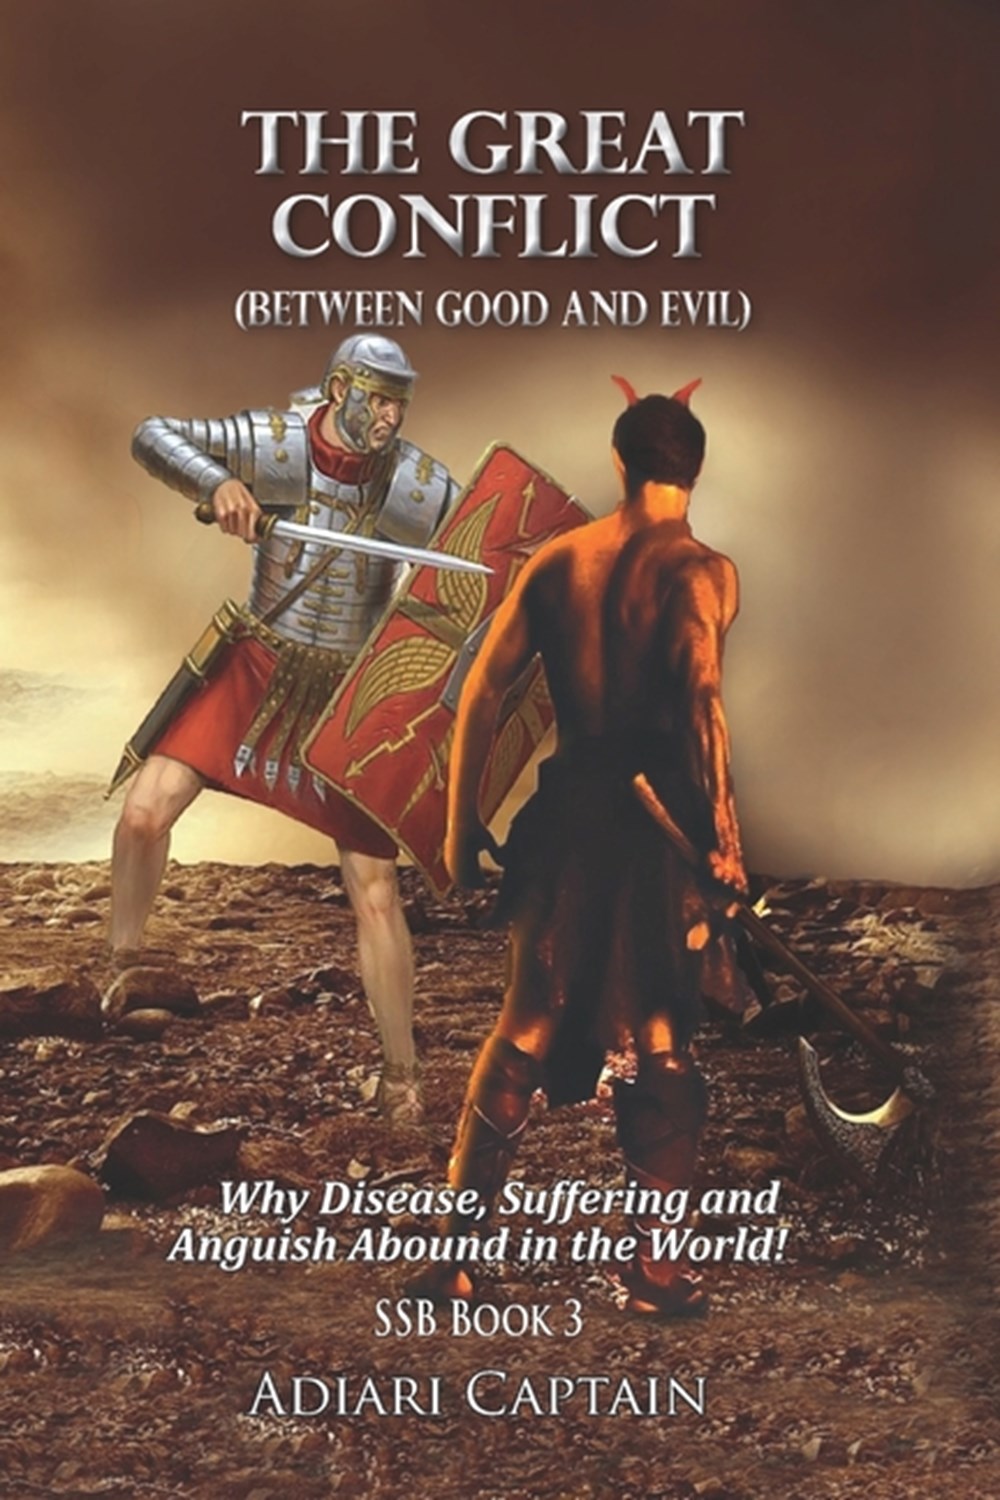 Great Conflict (Between Good and Evil) Why Disease, Suffering, and Anguish Abound in the World